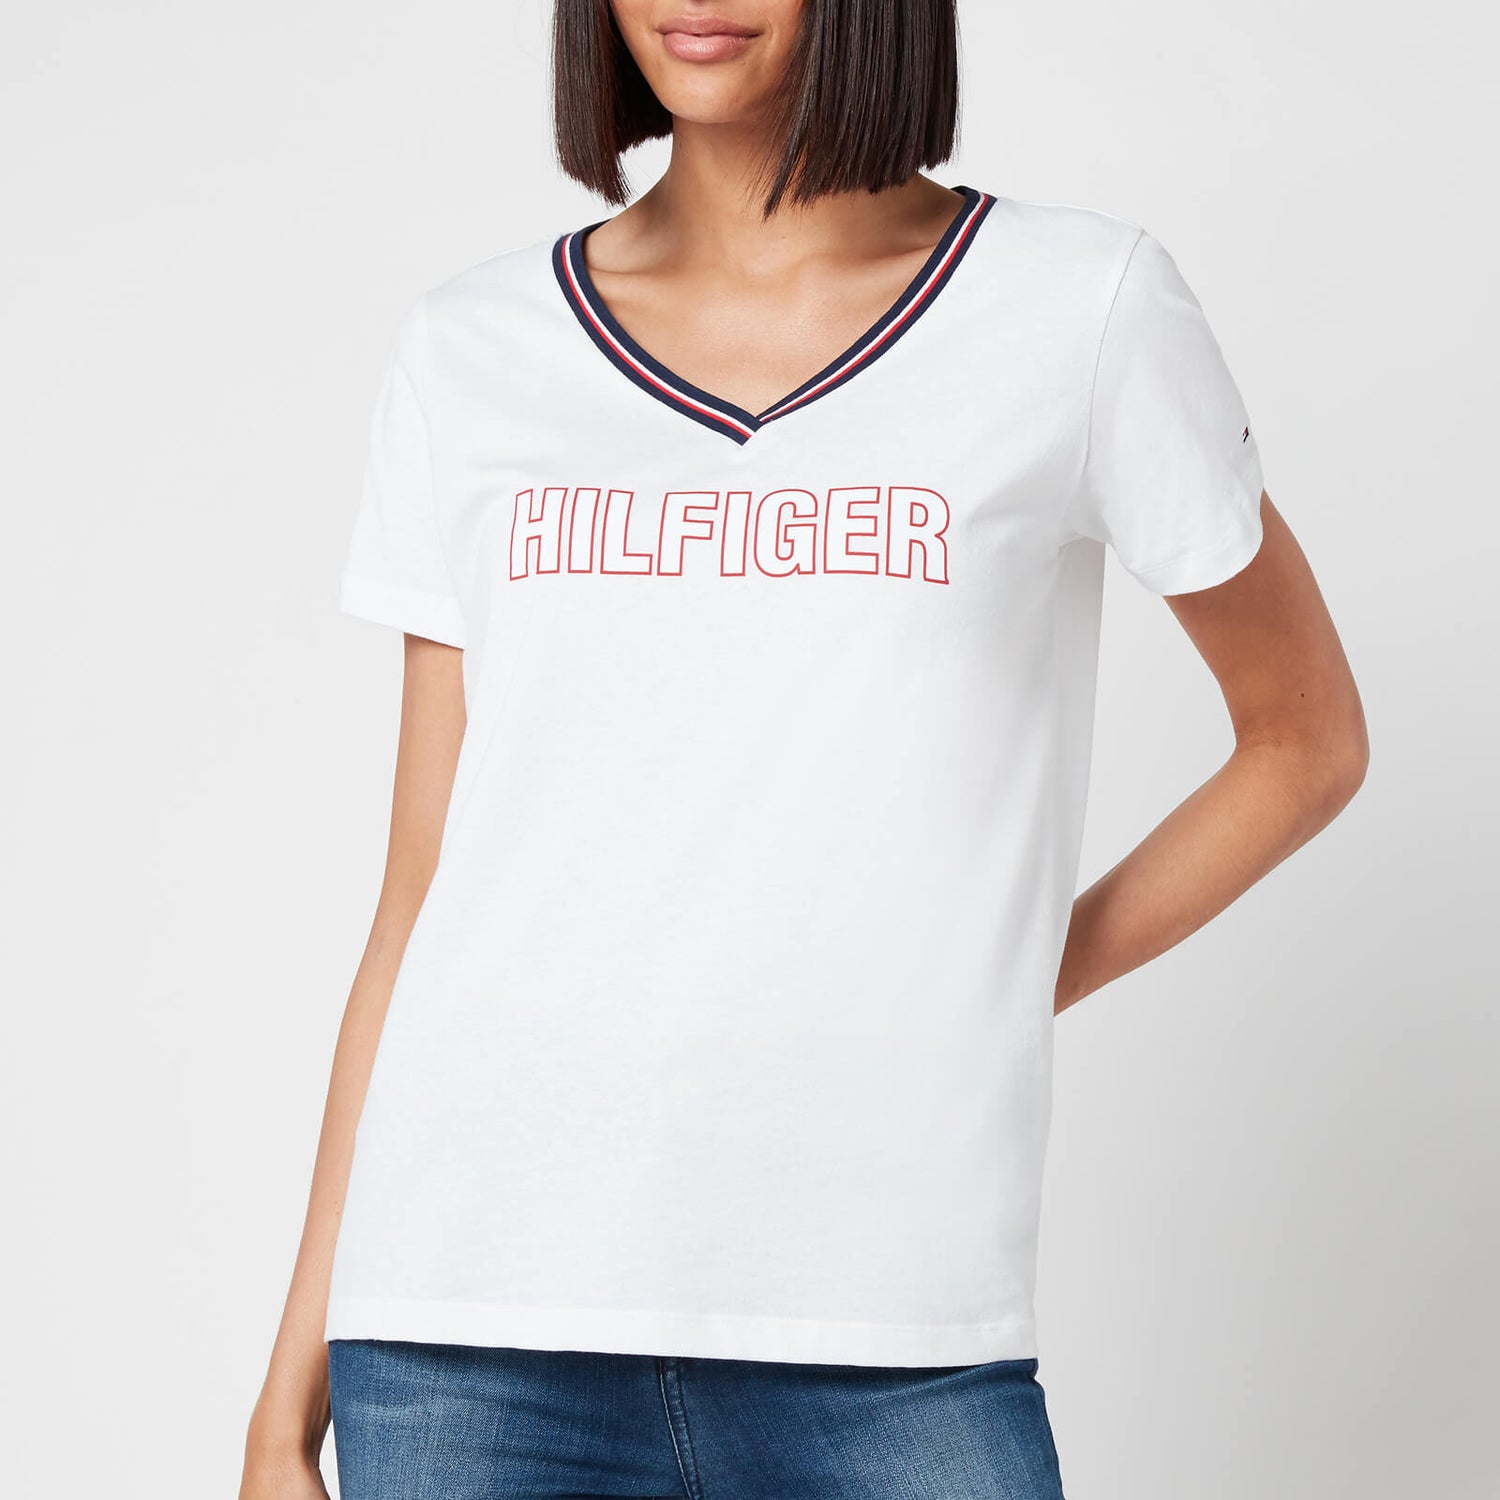 Tommy Hilfiger Women's Recycled T-Shirt - White